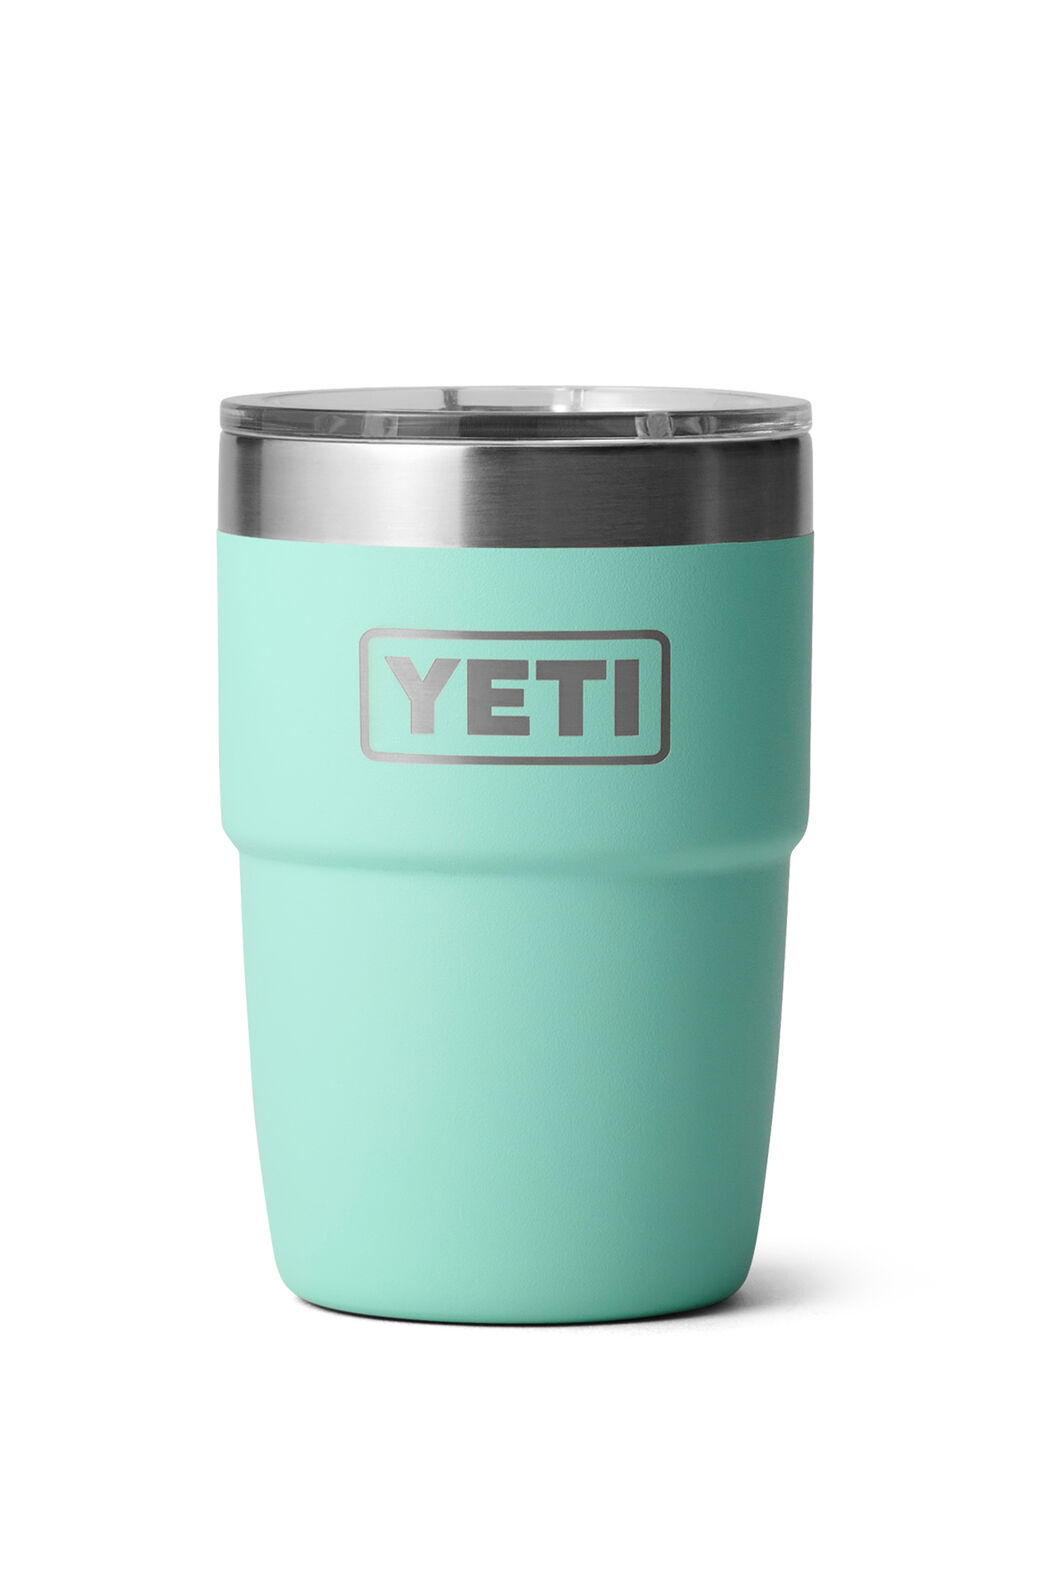  YETI Rambler 8 oz Stackable Cup, Stainless Steel, Vacuum  Insulated Espresso Cup with MagSlider Lid, Black: Home & Kitchen